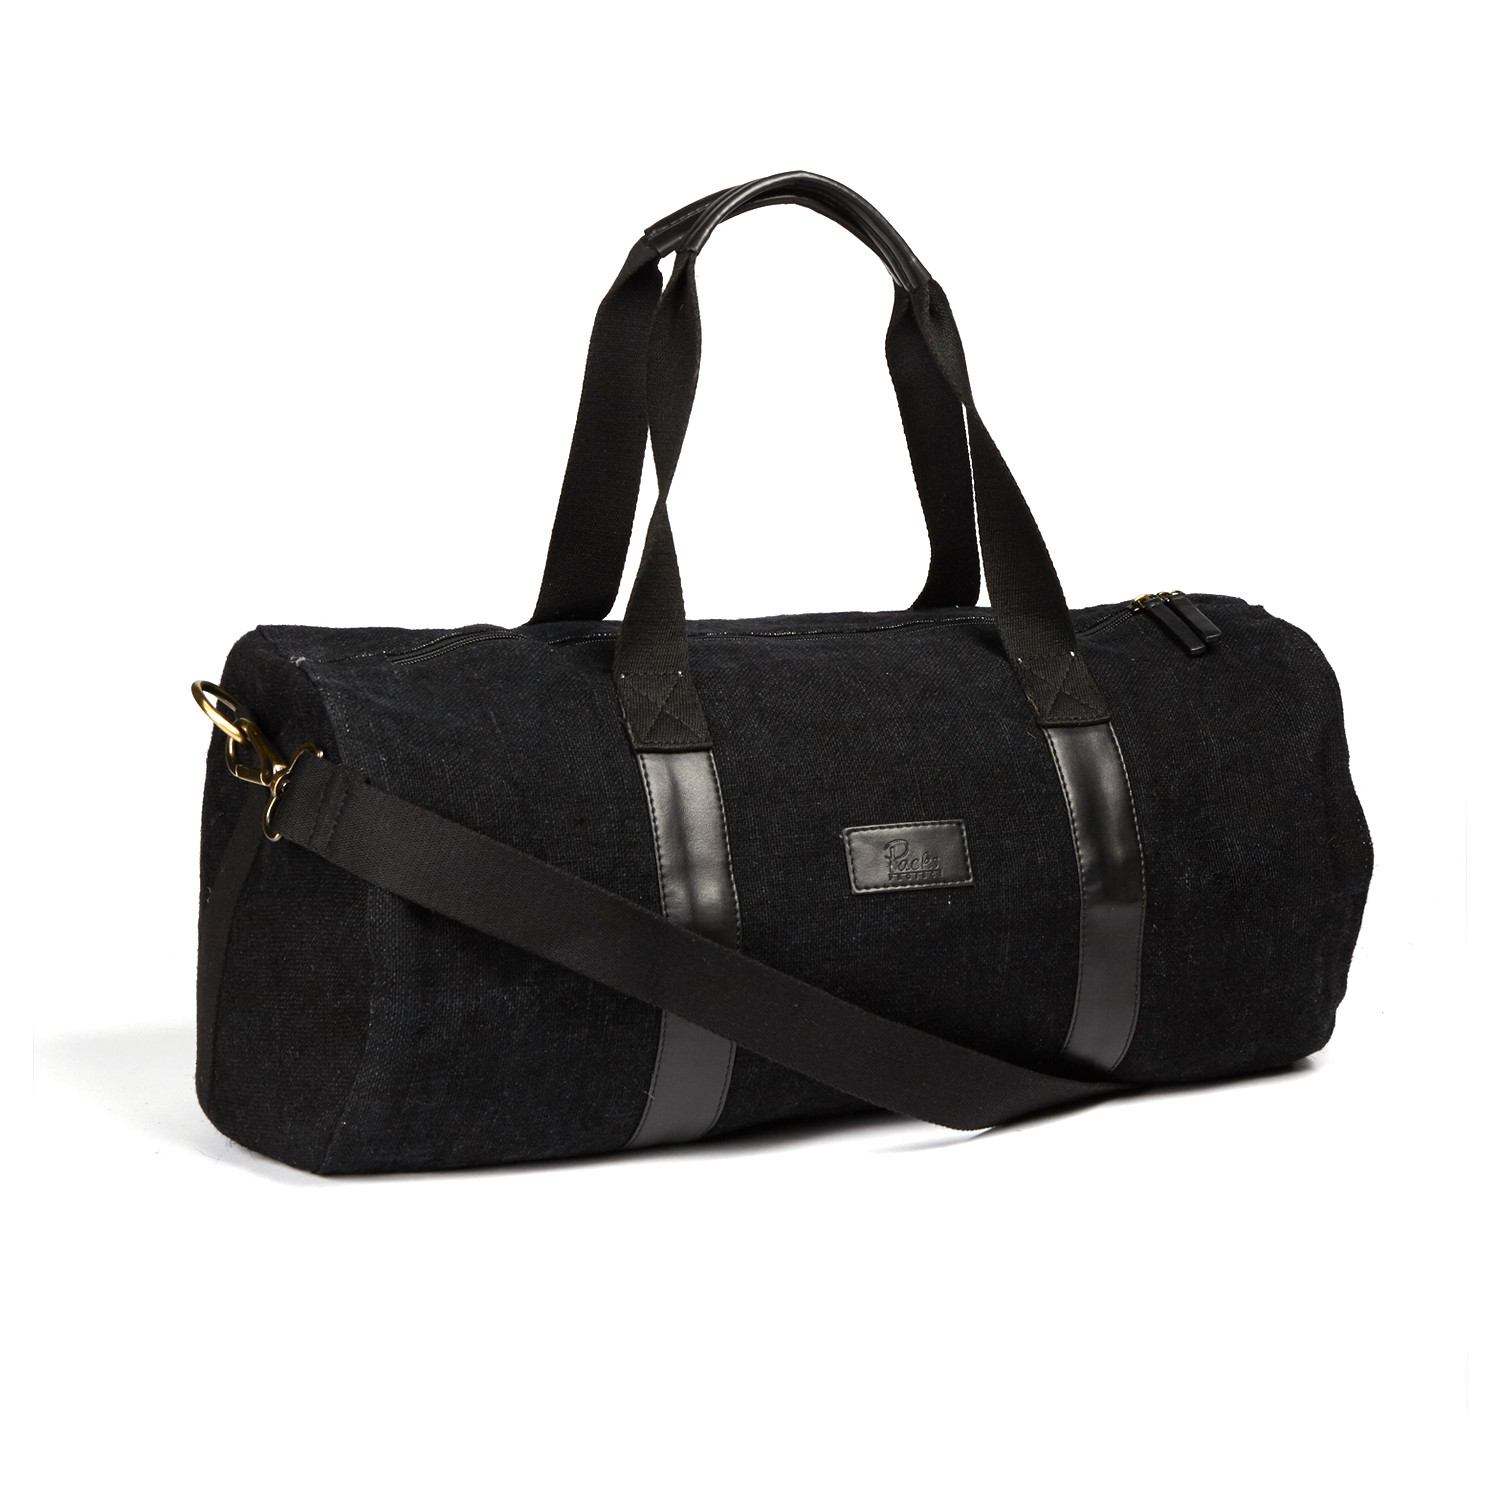 Oxford Duffel (Black) - Packs Project - Touch of Modern